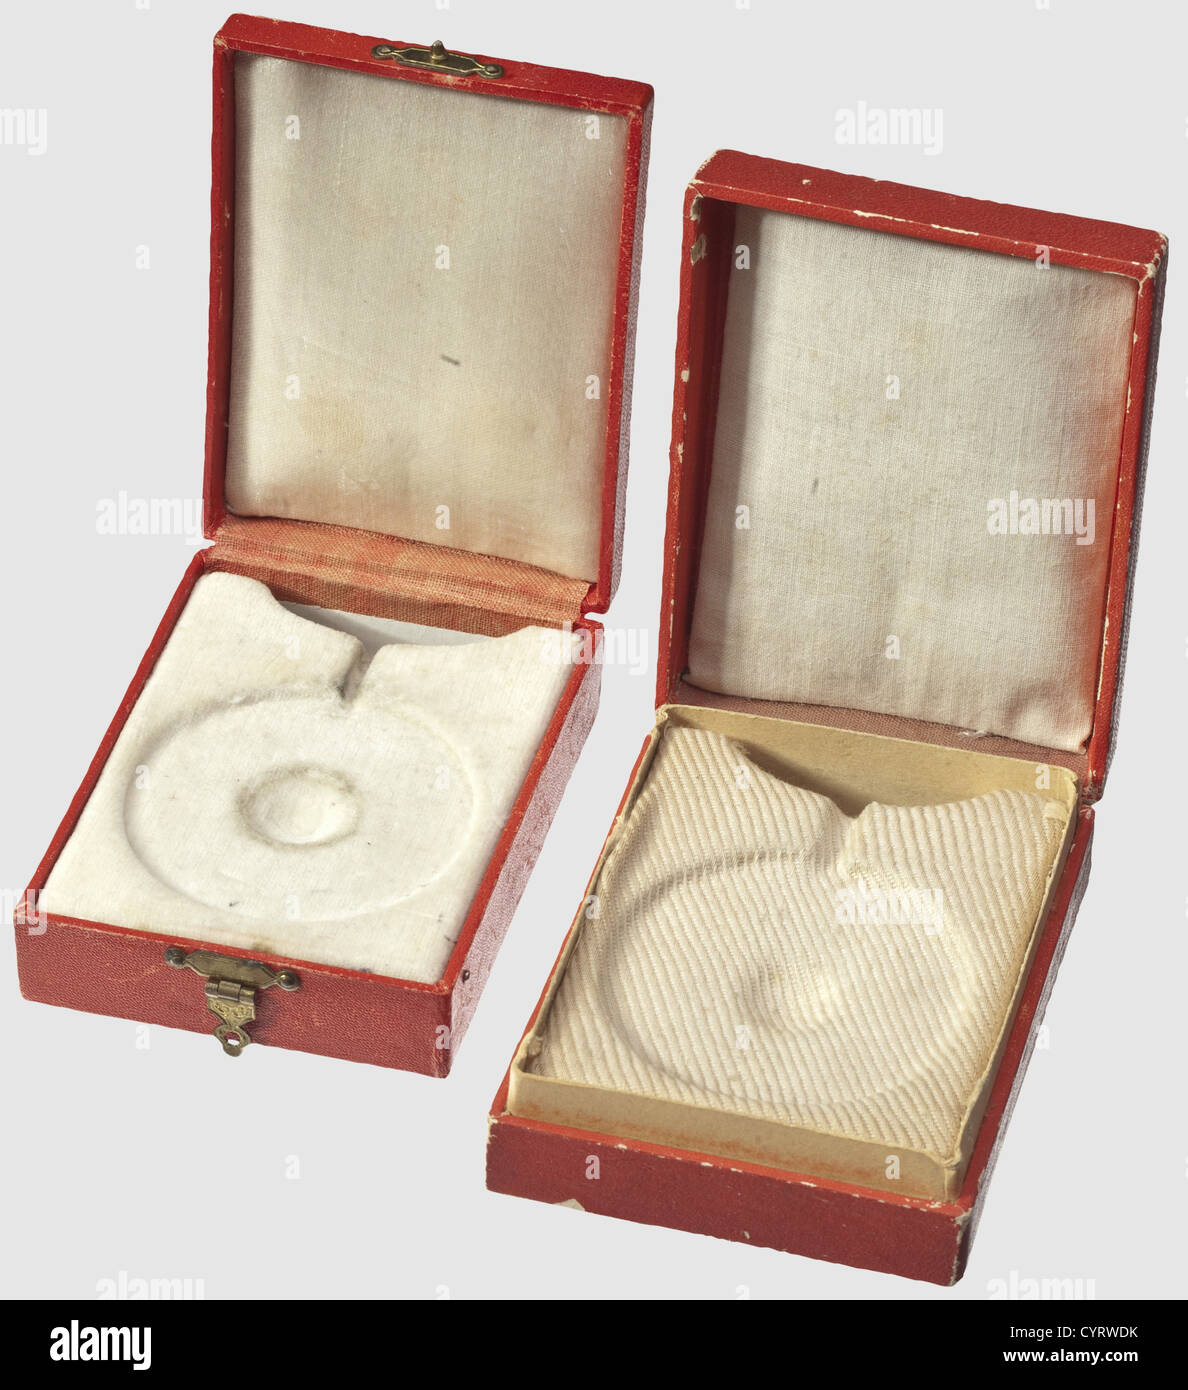 Five cases for the Order of St. Anne and the Order of St. Stanislaus, 2nd and 3rd Class, Russia, ca. 1910 Covers with gold stamped Russian double eagle. Dimensions from 88 x 62 to 93 x 71 mm. Cream-coloured velvet and linen liners in part replaced or reworked. Small defects and signs of usage, historic, historical, 1910s, 20th century, medal, decoration, medals, decorations, badge of honour, badge of honor, badges of honour, badges of honor, object, objects, stills, clipping, clippings, cut out, cut-out, cut-outs, Additional-Rights-Clearences-Not Available Stock Photo